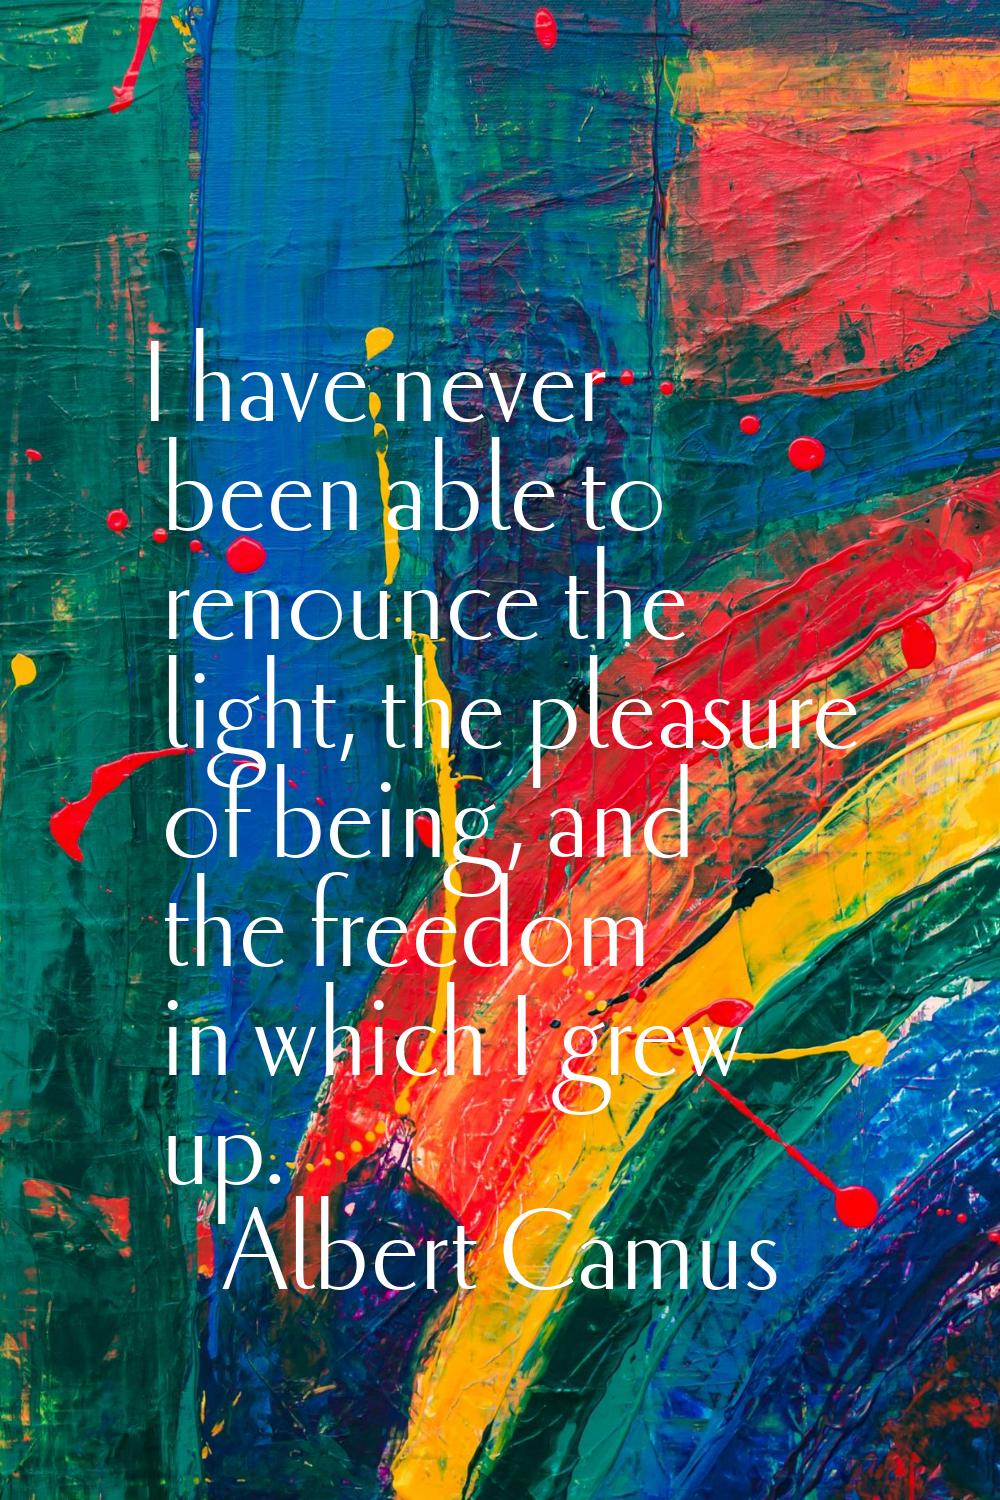 I have never been able to renounce the light, the pleasure of being, and the freedom in which I gre